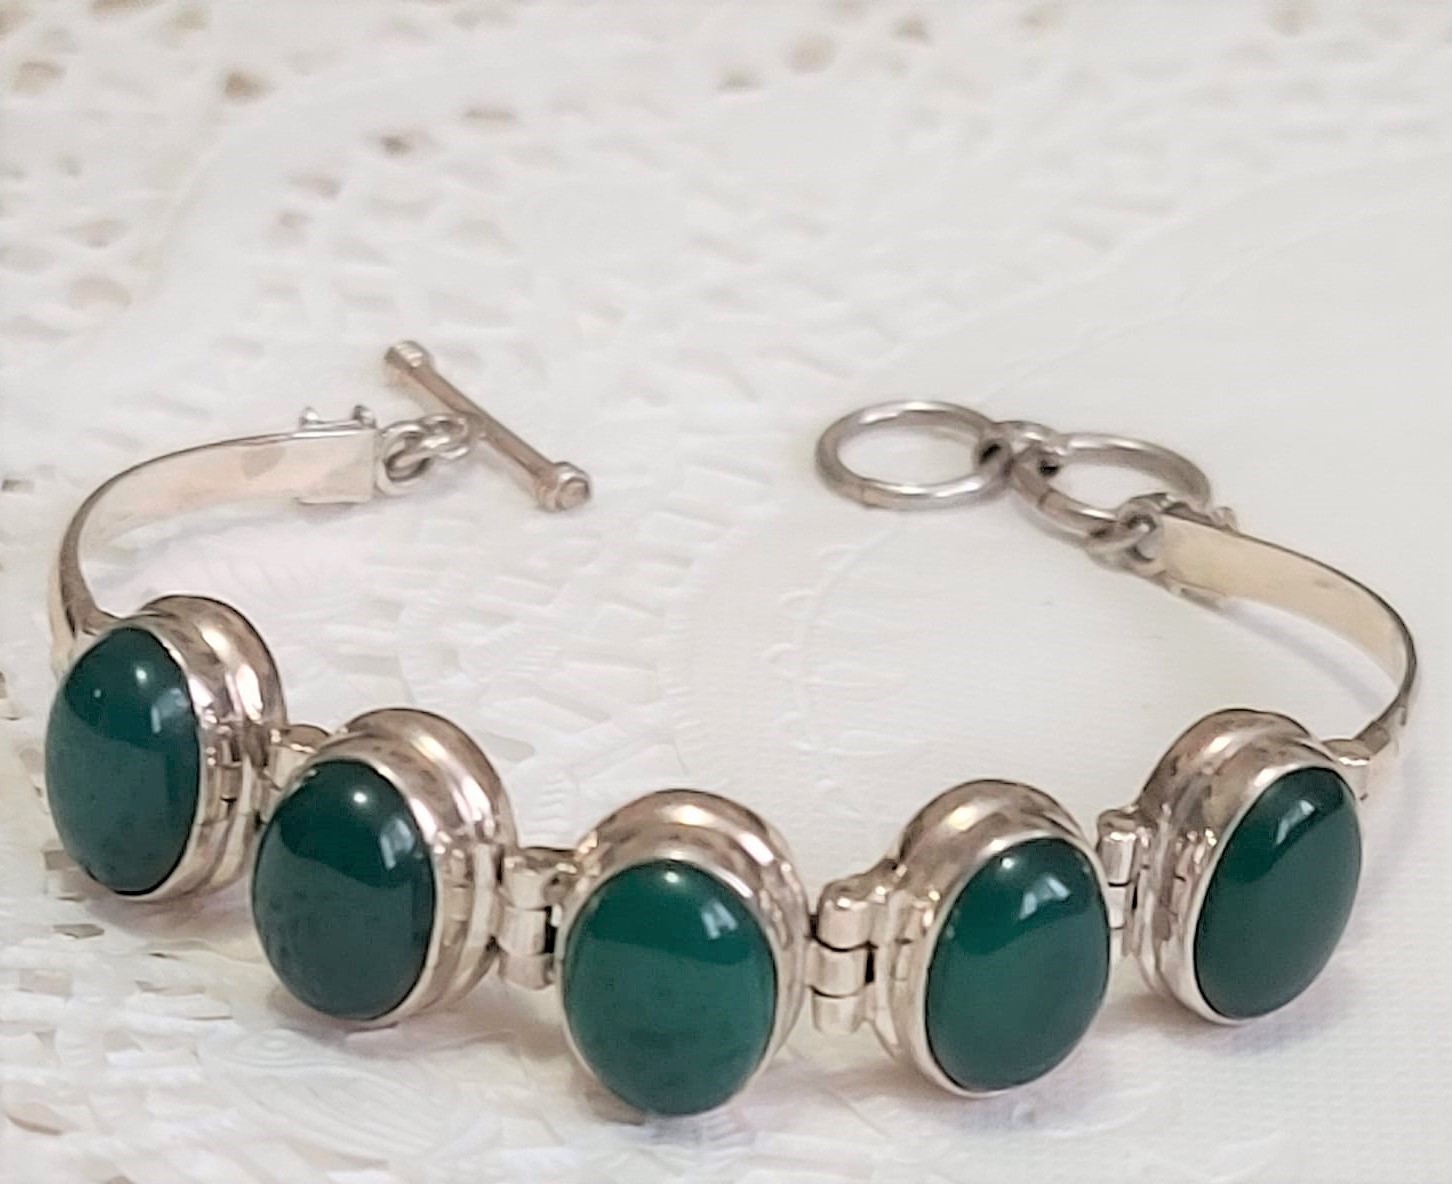 Green Onyx and 925 Sterling Silver Bracelet